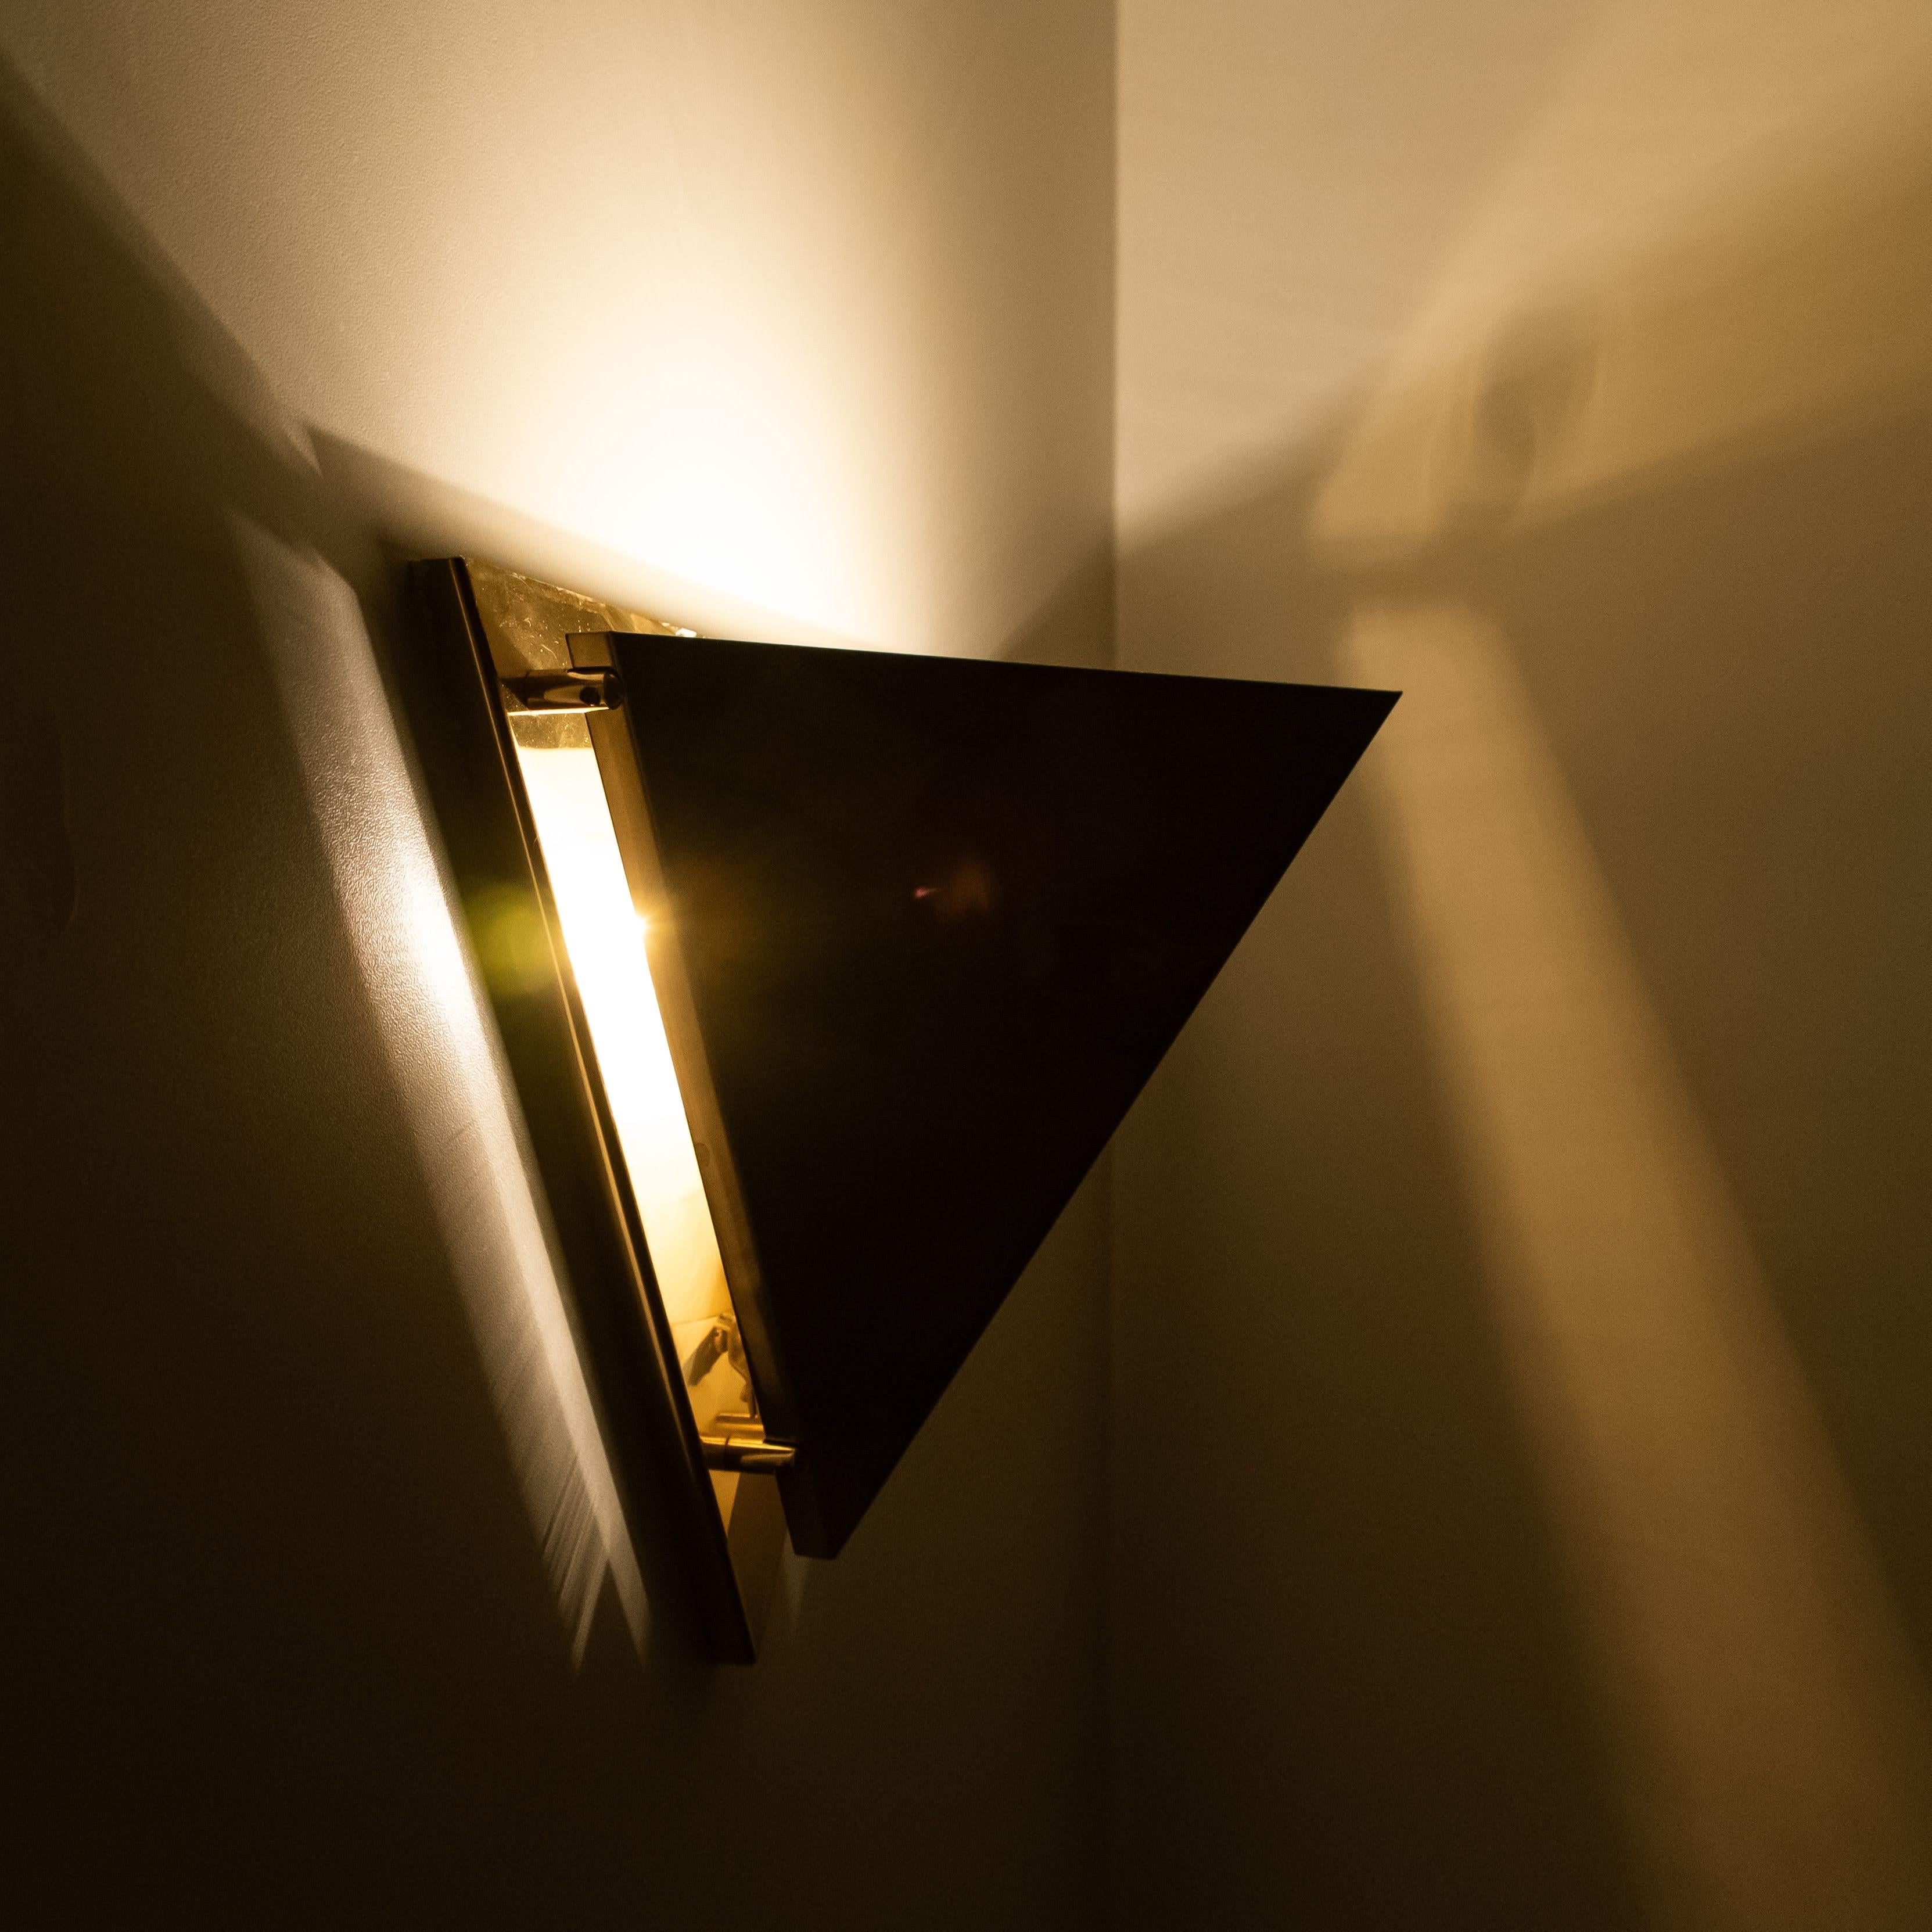 Mid-Century Modern 1 of the 5 Pyramid Shaped Massive Brass Wall Lamps, 1970s